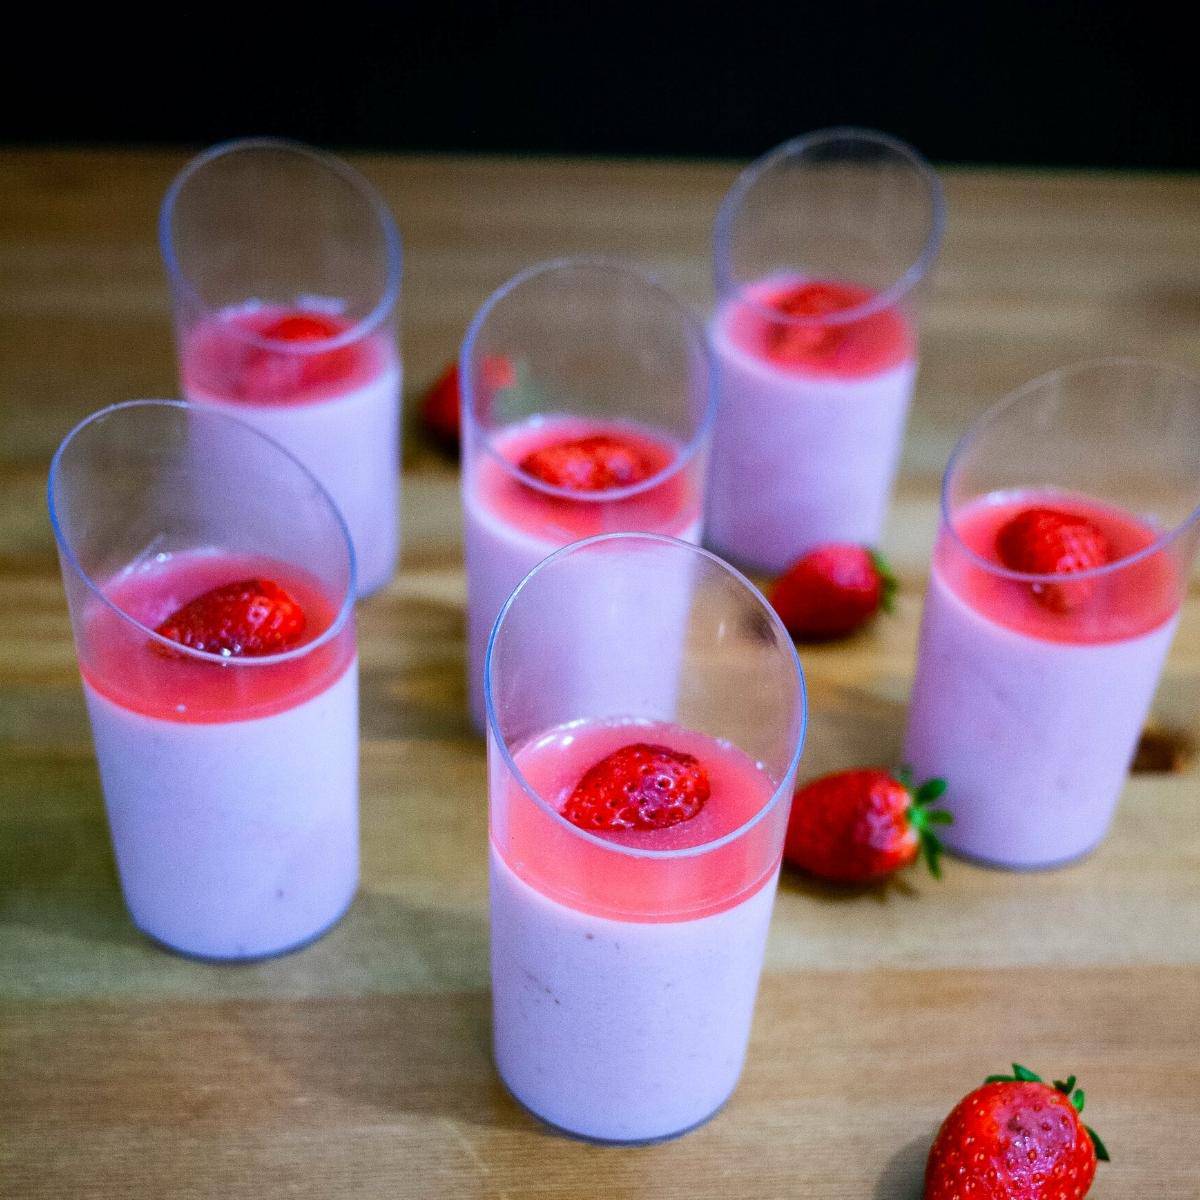 Dessert cups with bavarian cream topped with strawberries.